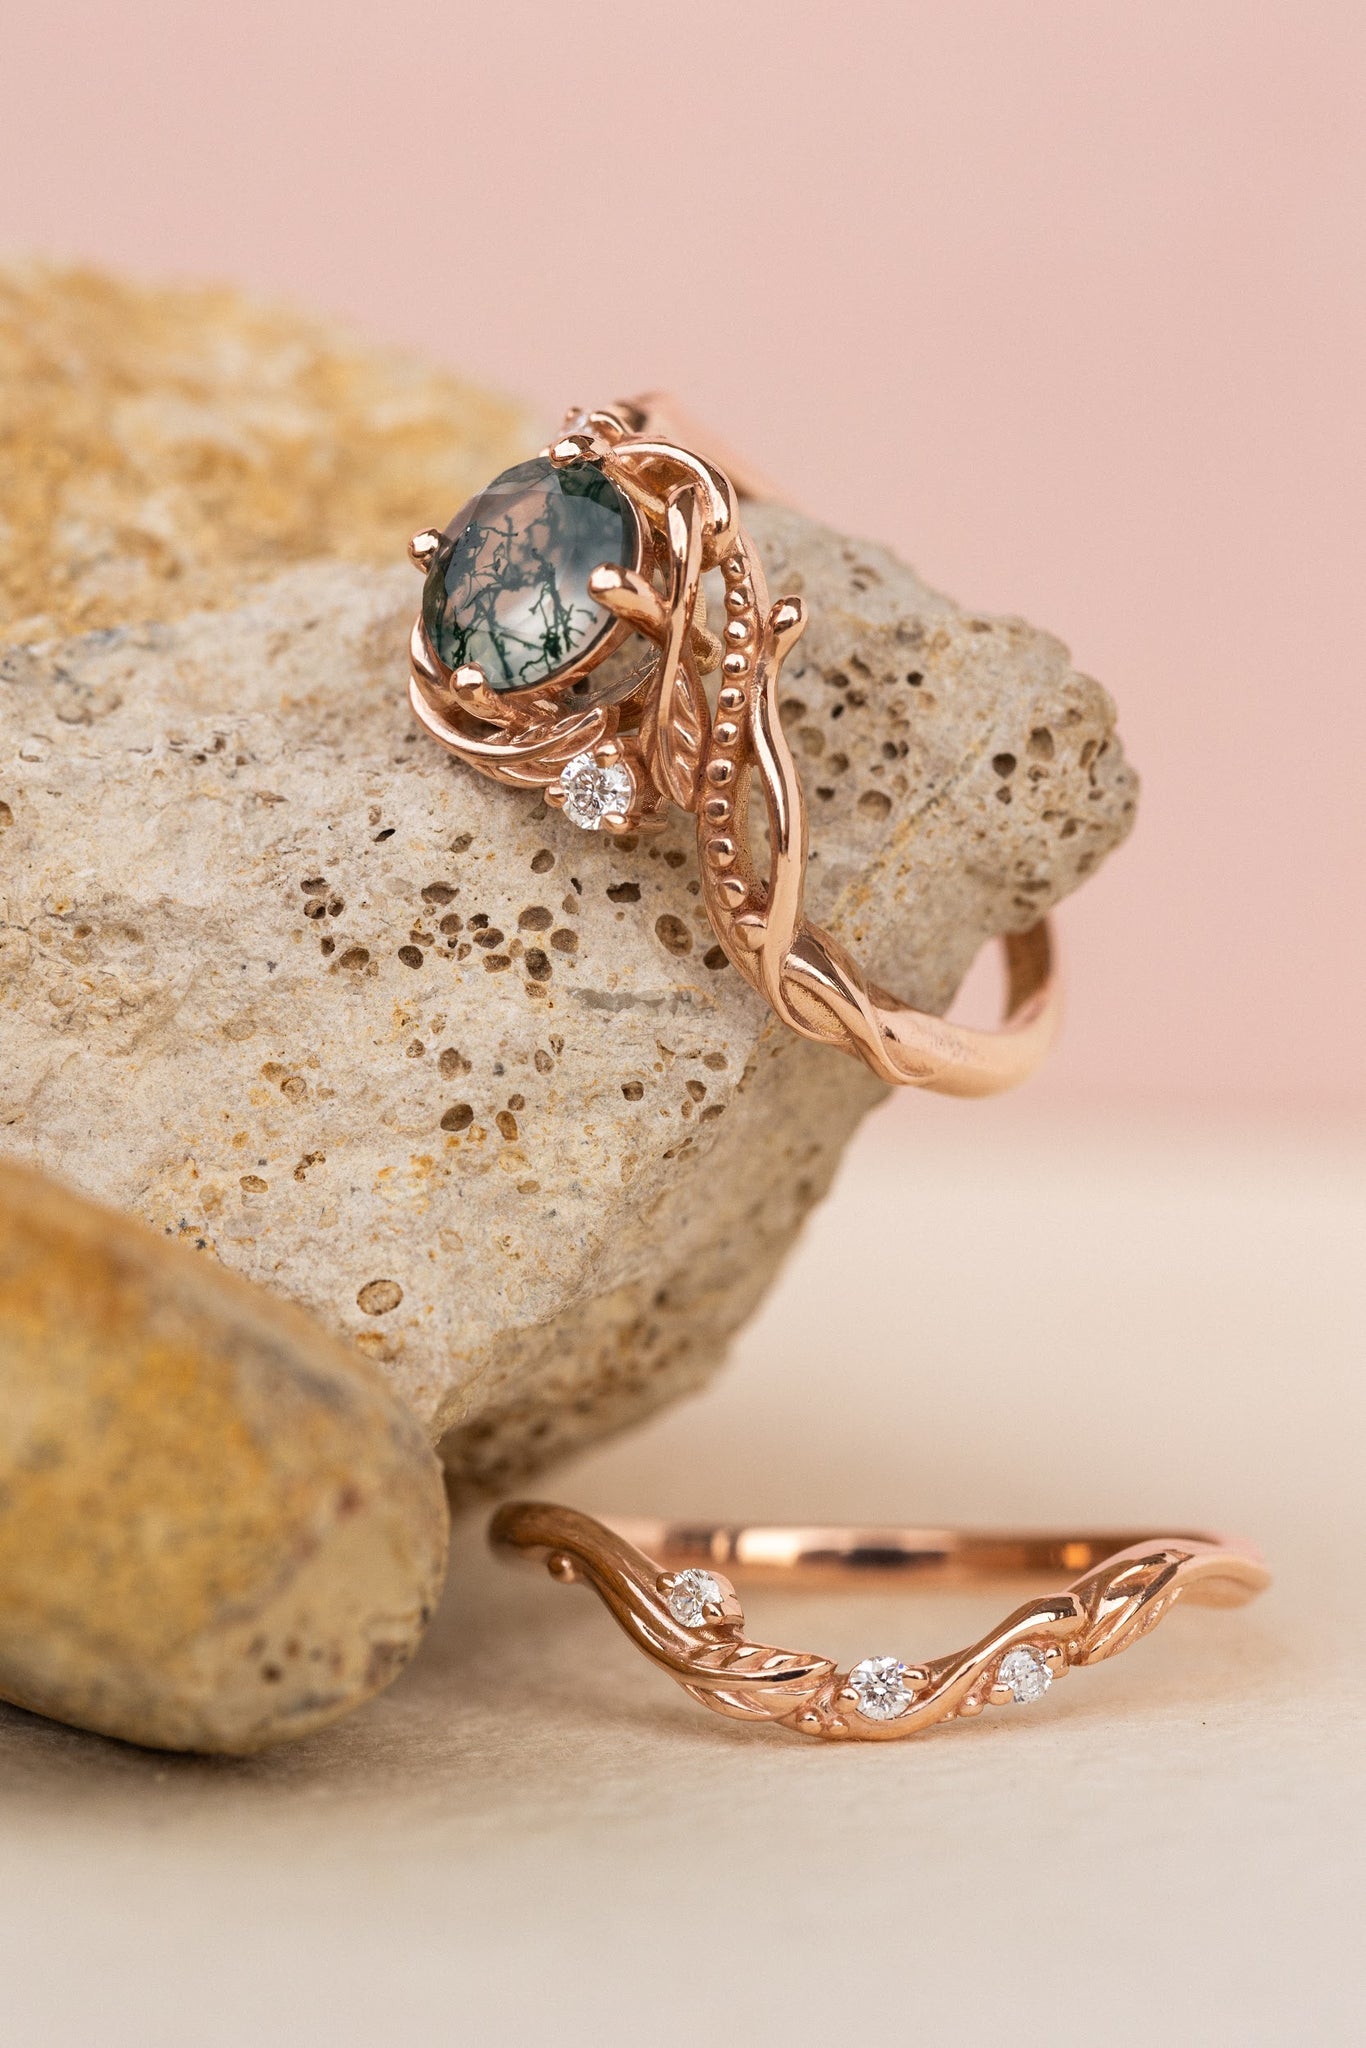 Bridal ring set in rose gold with natural round moss agate and accent diamonds / Undina - Eden Garden Jewelry™